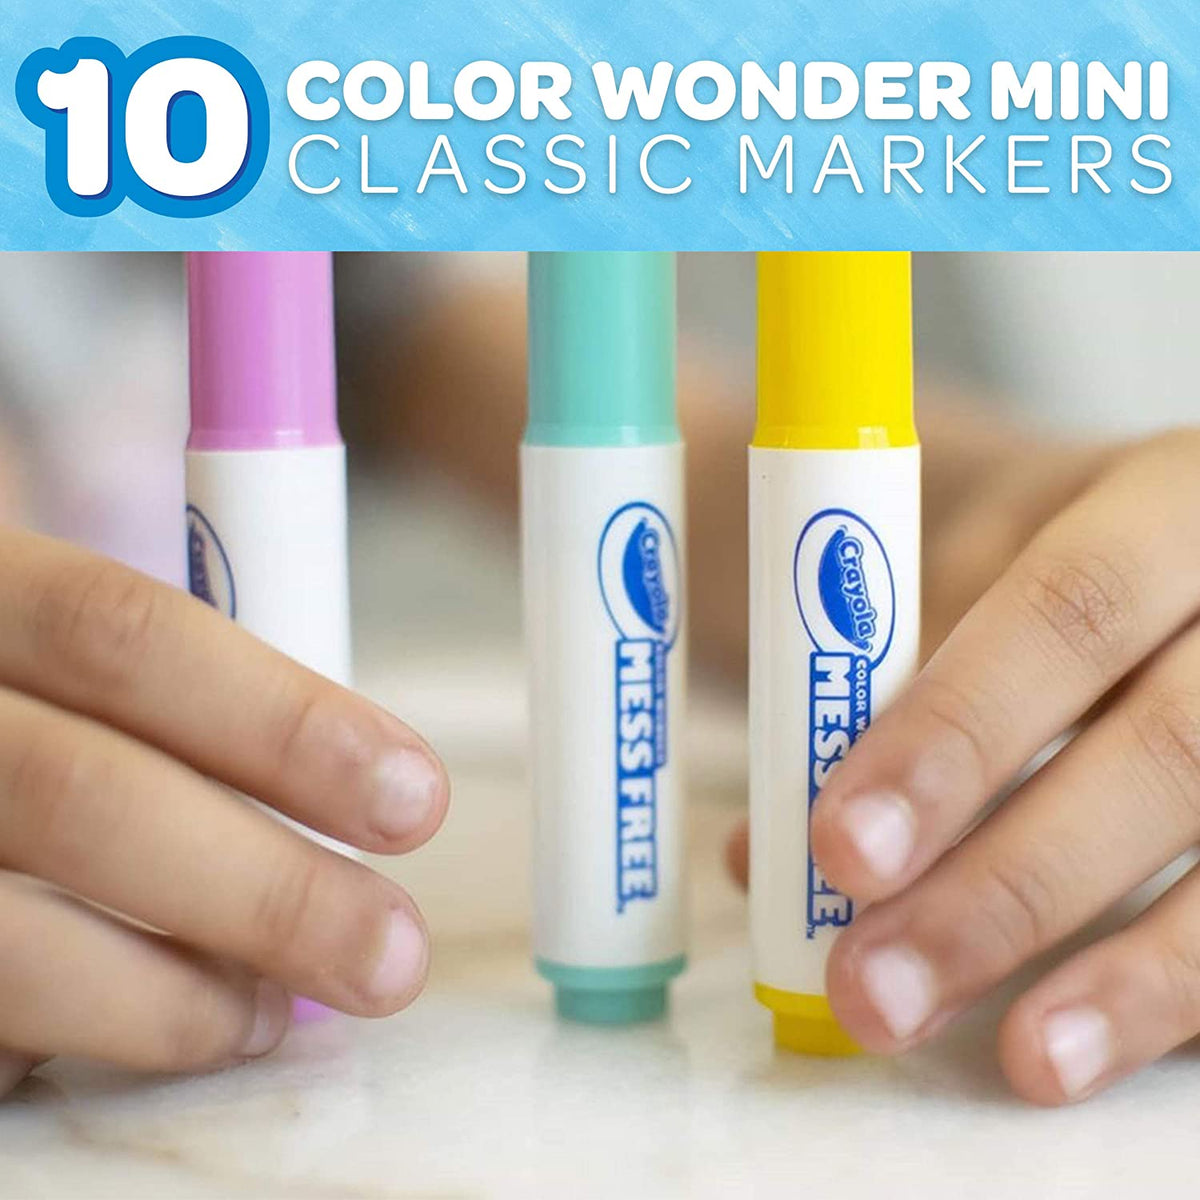 Crayola Color Wonder Markers, Mini - 10 markers